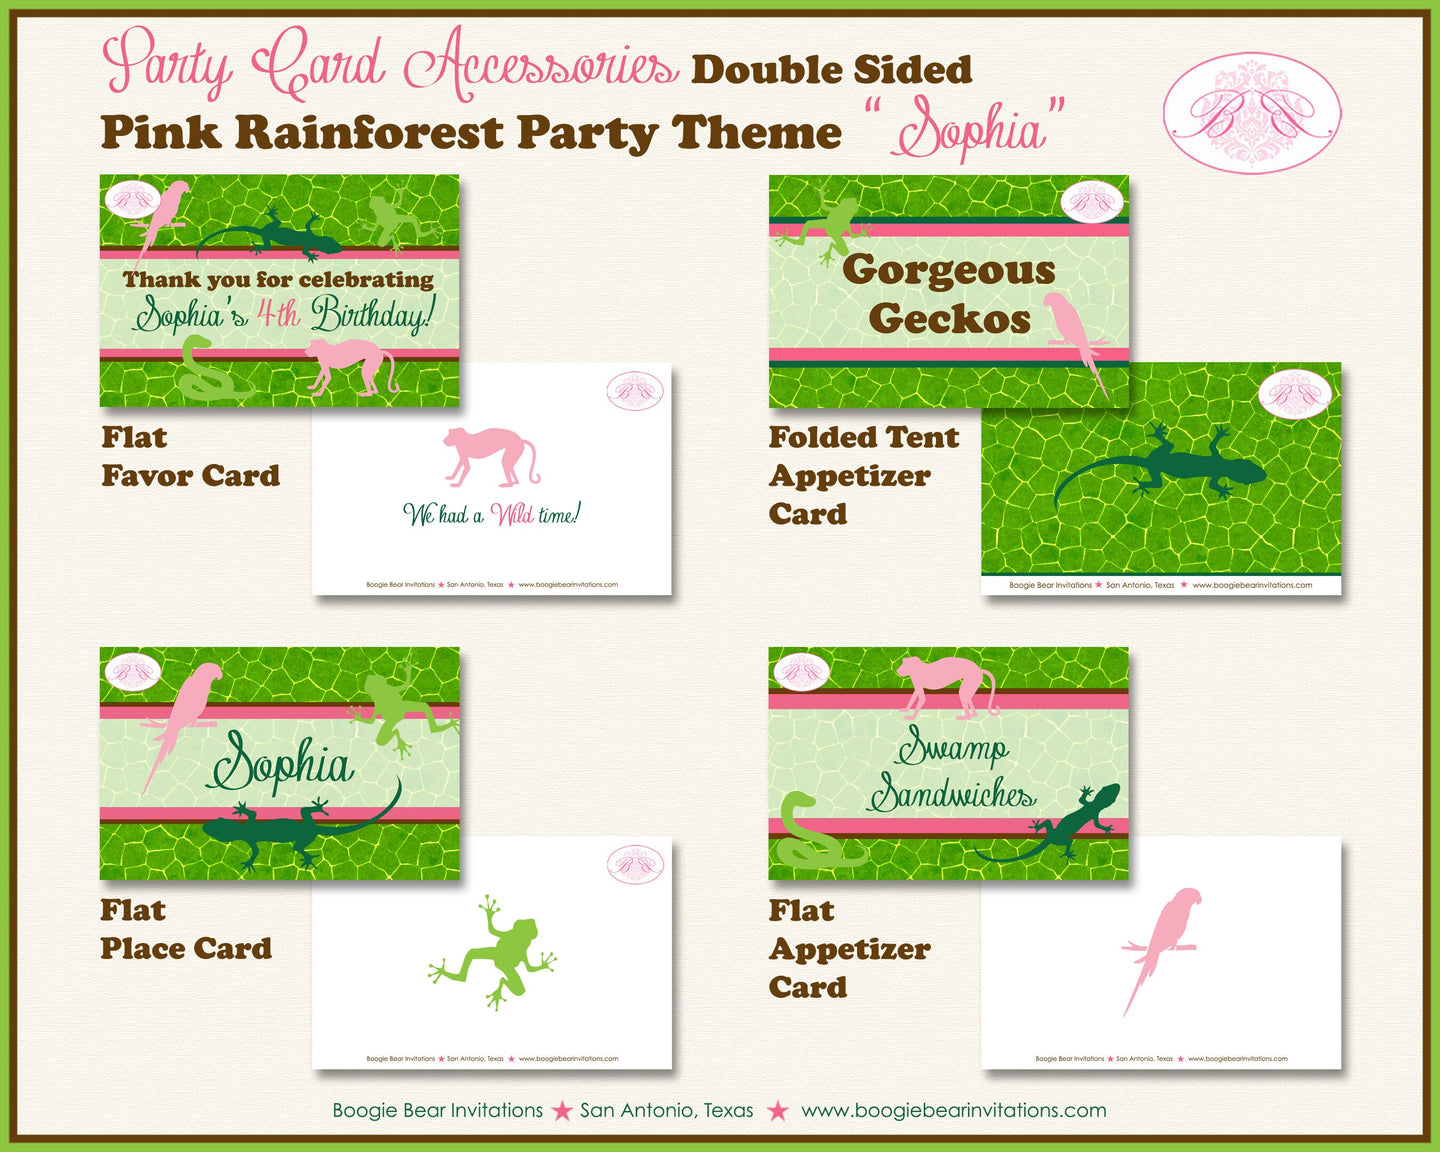 Pink Rain Forest Birthday Party Favor Card Appetizer Place Food Folded Tent Reptile Jungle Zoo Boogie Bear Invitations Sophia Theme Printed